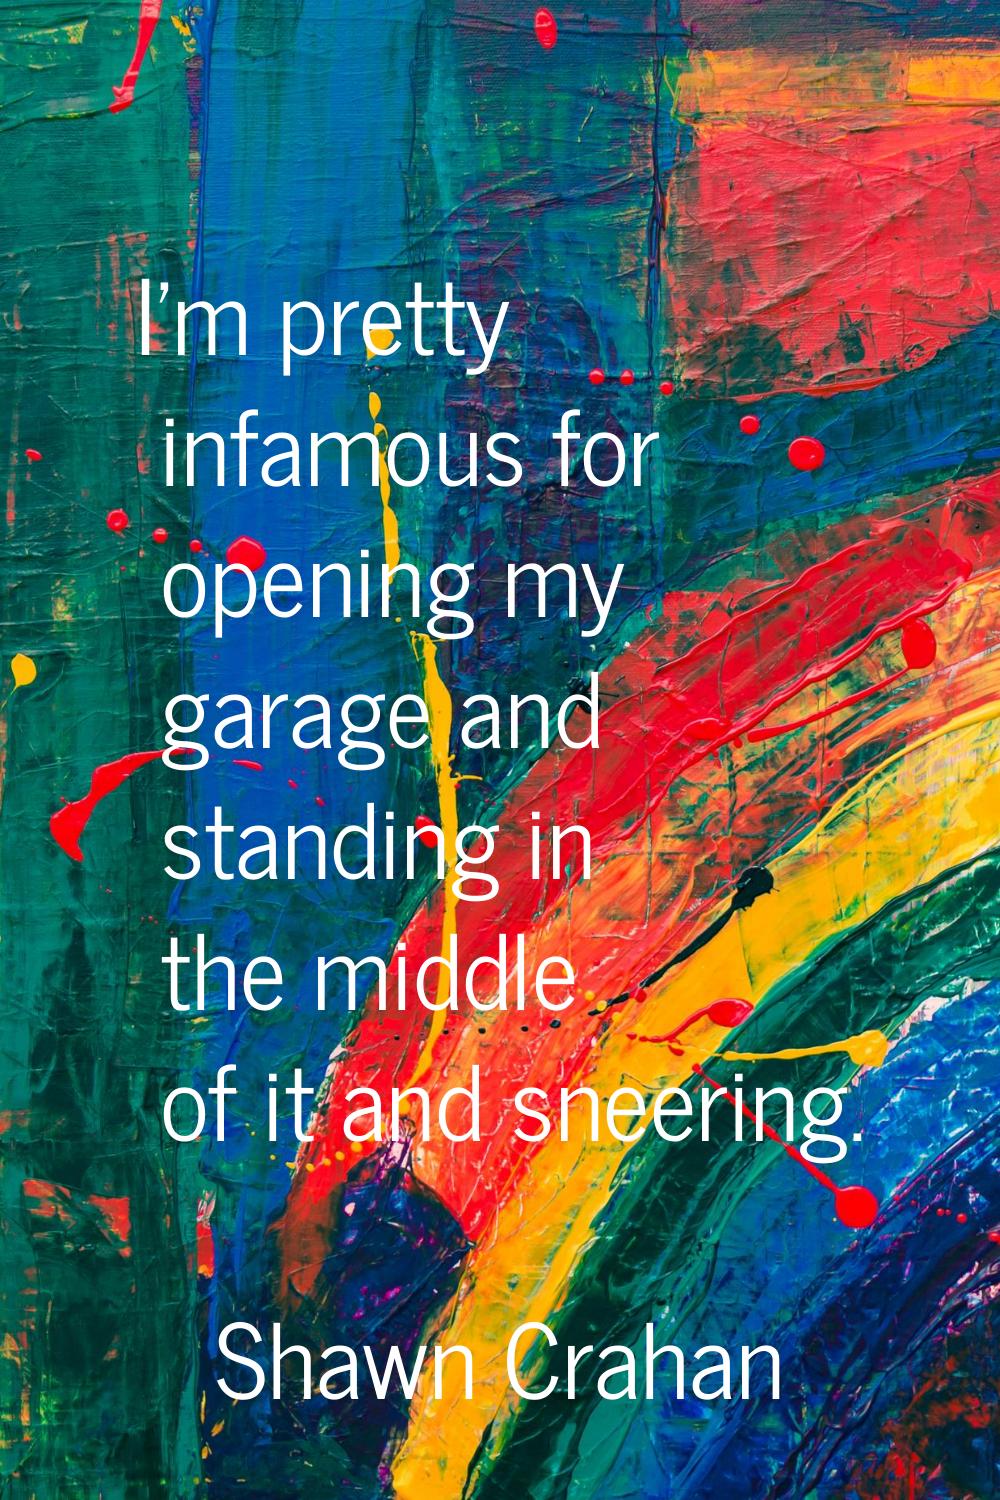 I'm pretty infamous for opening my garage and standing in the middle of it and sneering.